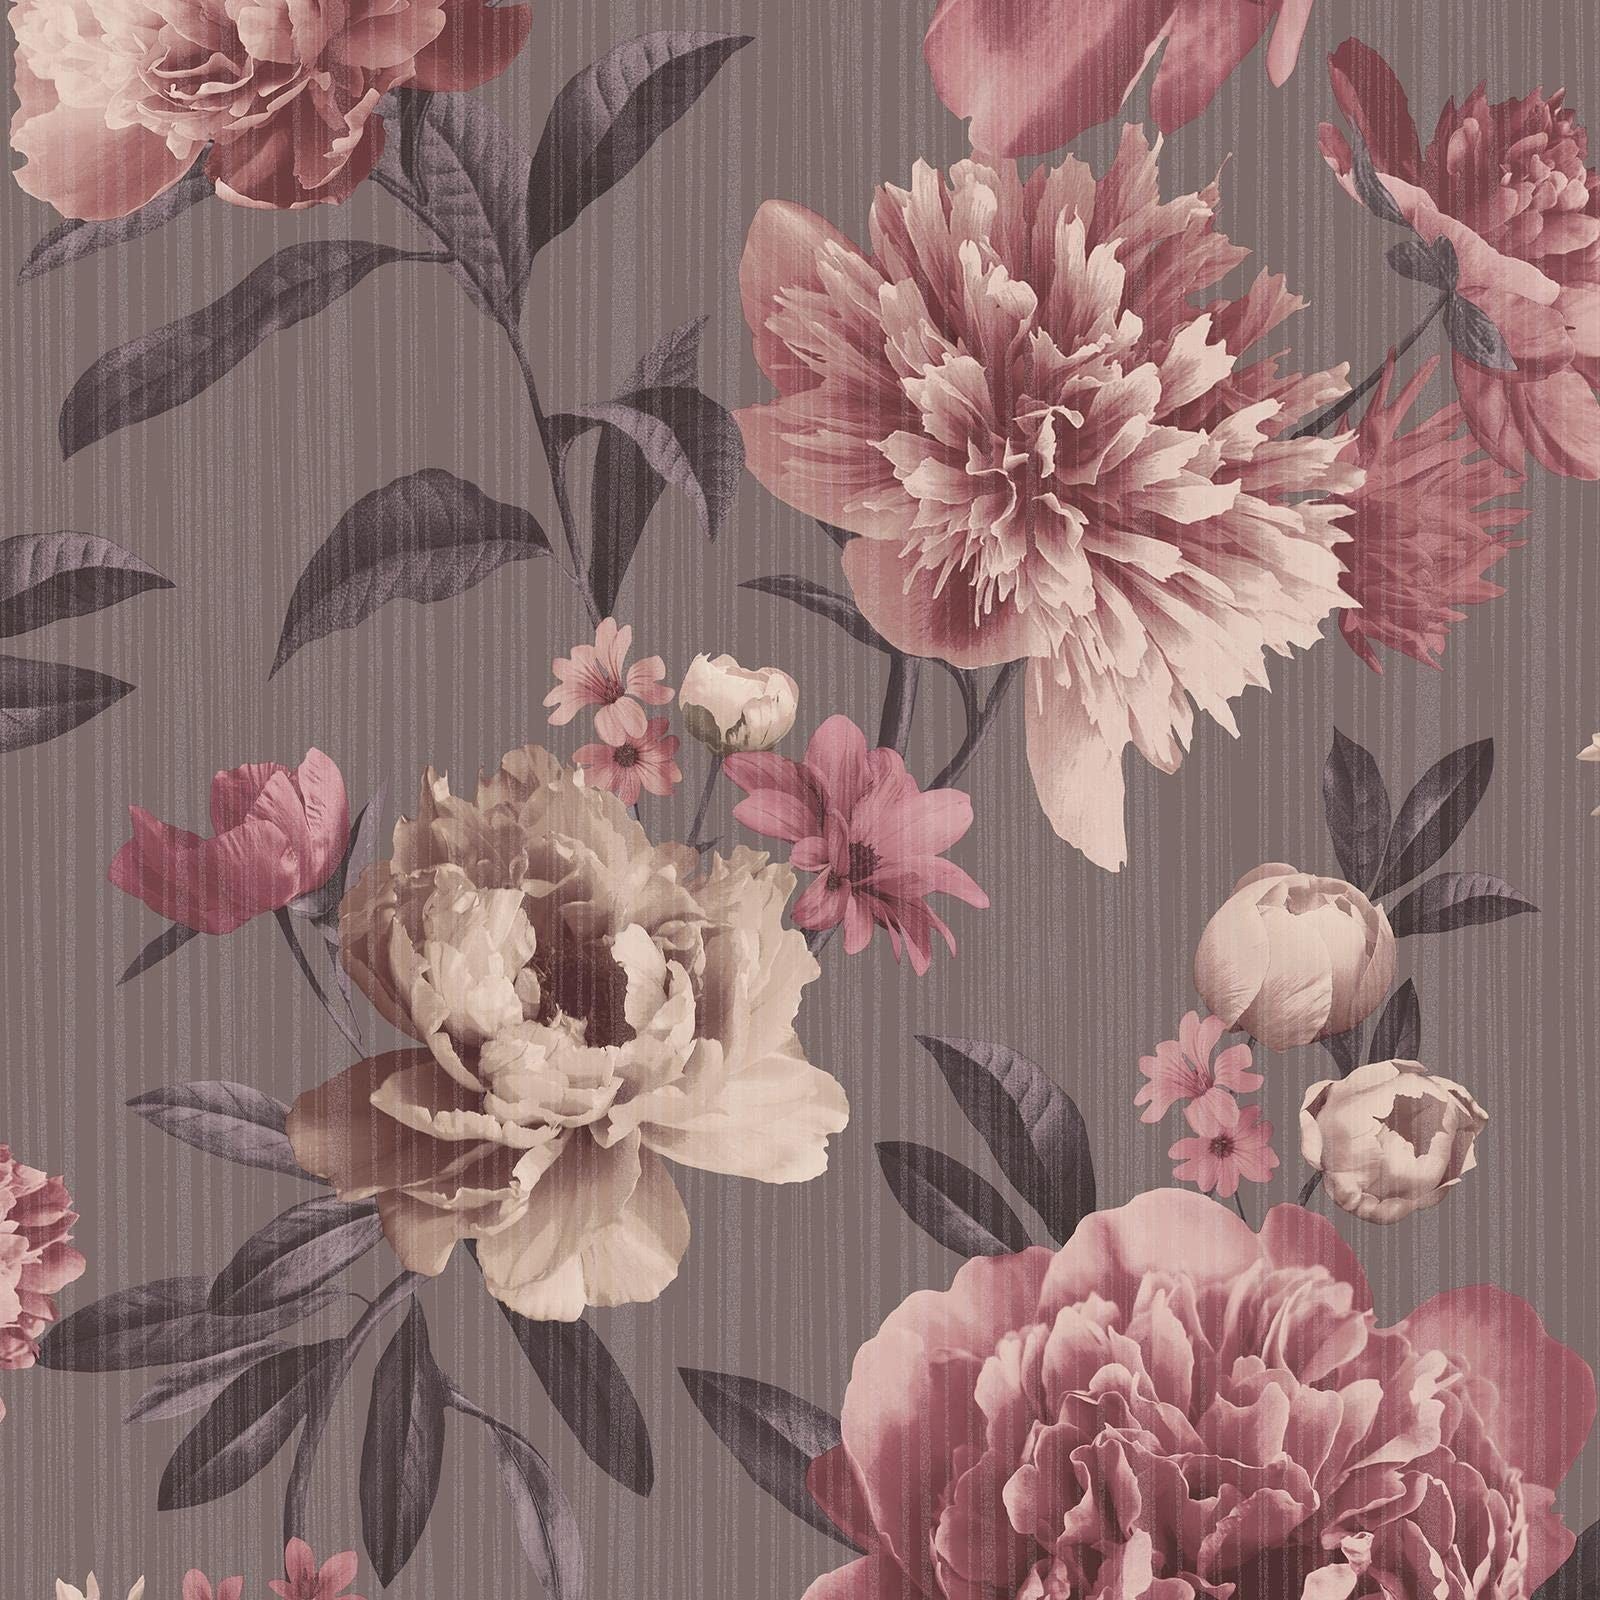 Valentina Big Bloom Wallpaper - Modern Wallpaper for Living Room, Bedroom, Fireplace - Decorative Luxury Floral Wall Paper with Blooming Flowers & Subtle Glimmers (Pink/Purple/Mauve)